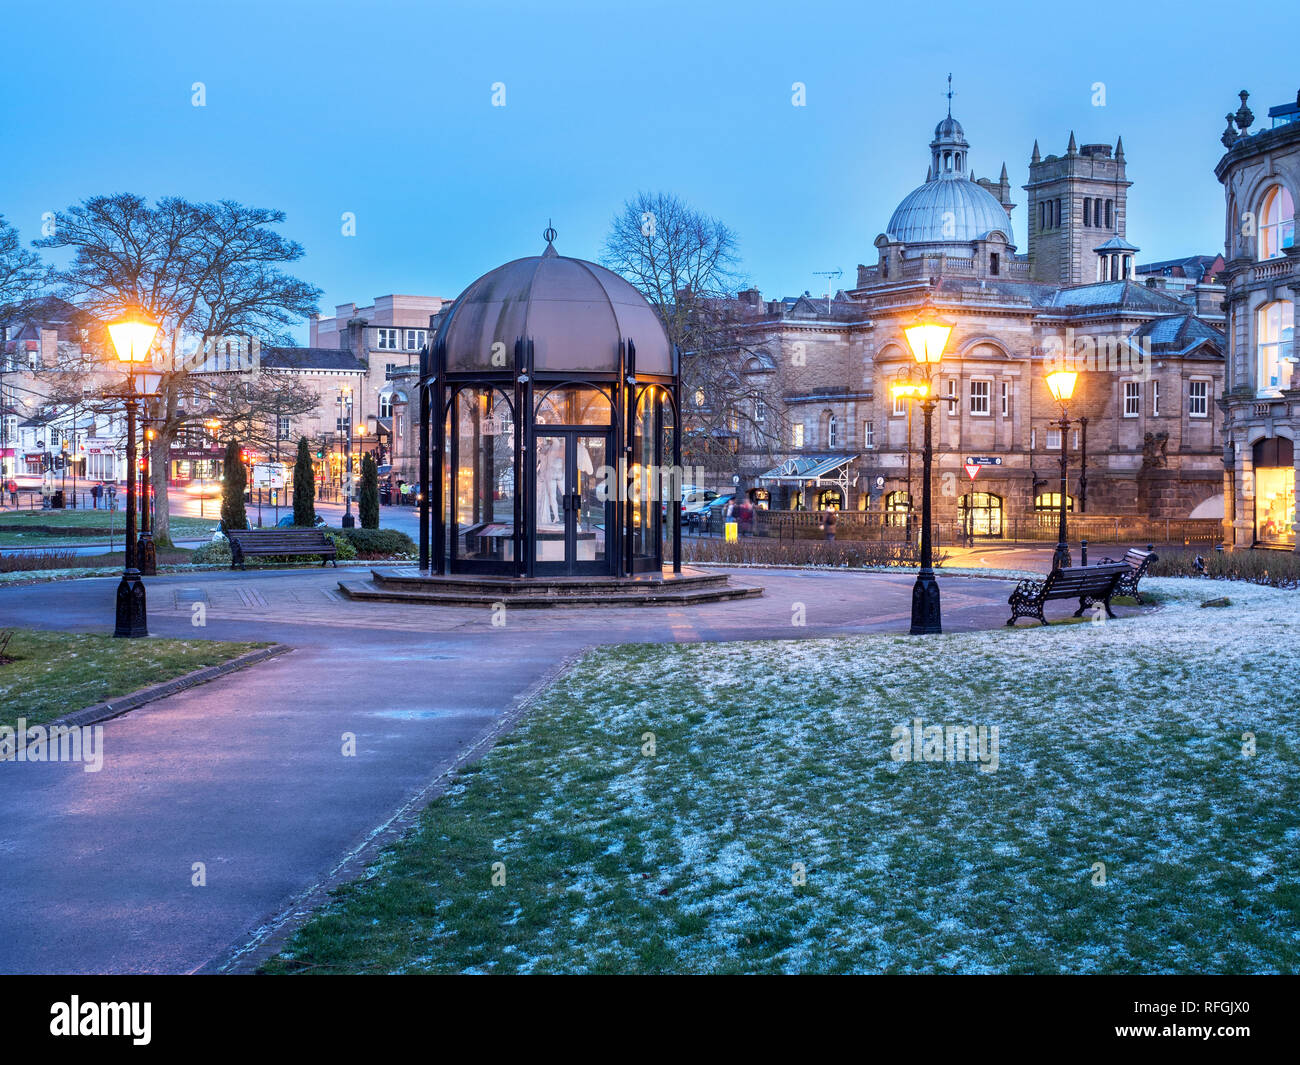 Crescent Gardens and old Royal Baths at dusk in winter Harrogate North Yorkshire England Stock Photo